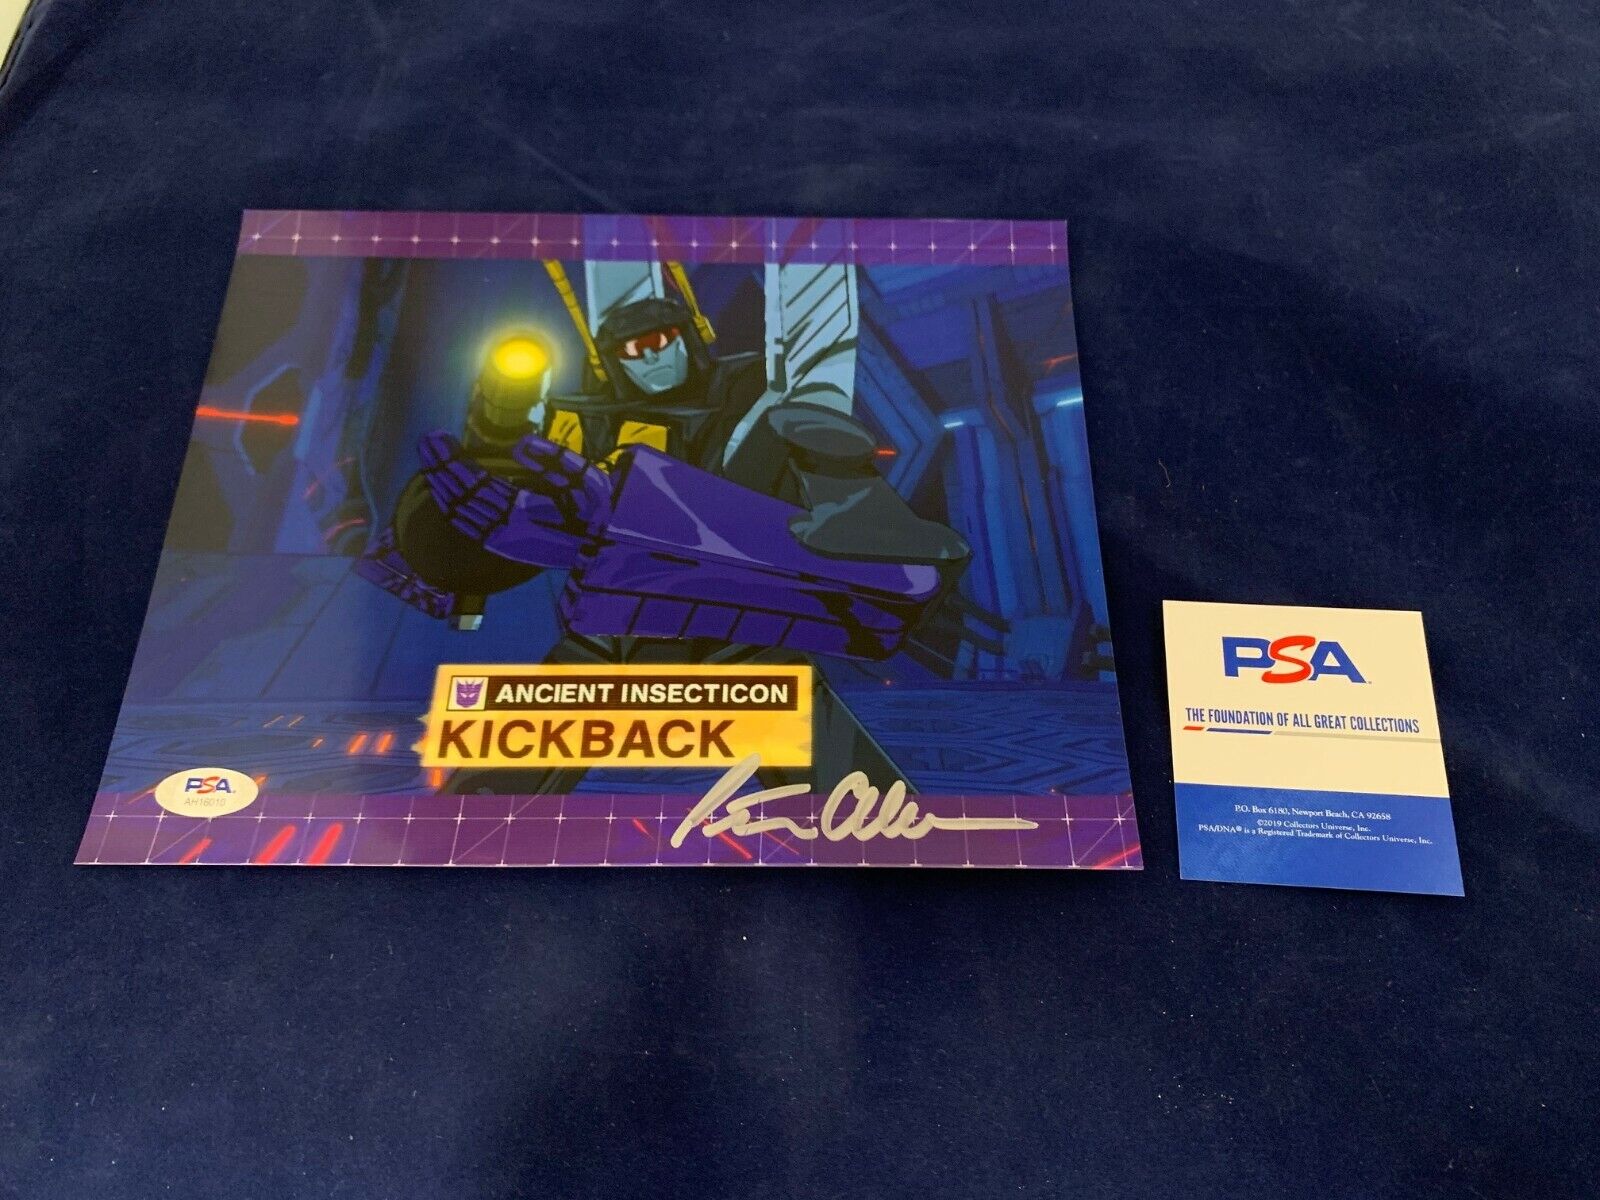 Peter Cullen Transformers Signed 8x10 Color Photo of Ancient Insecticon KickBack